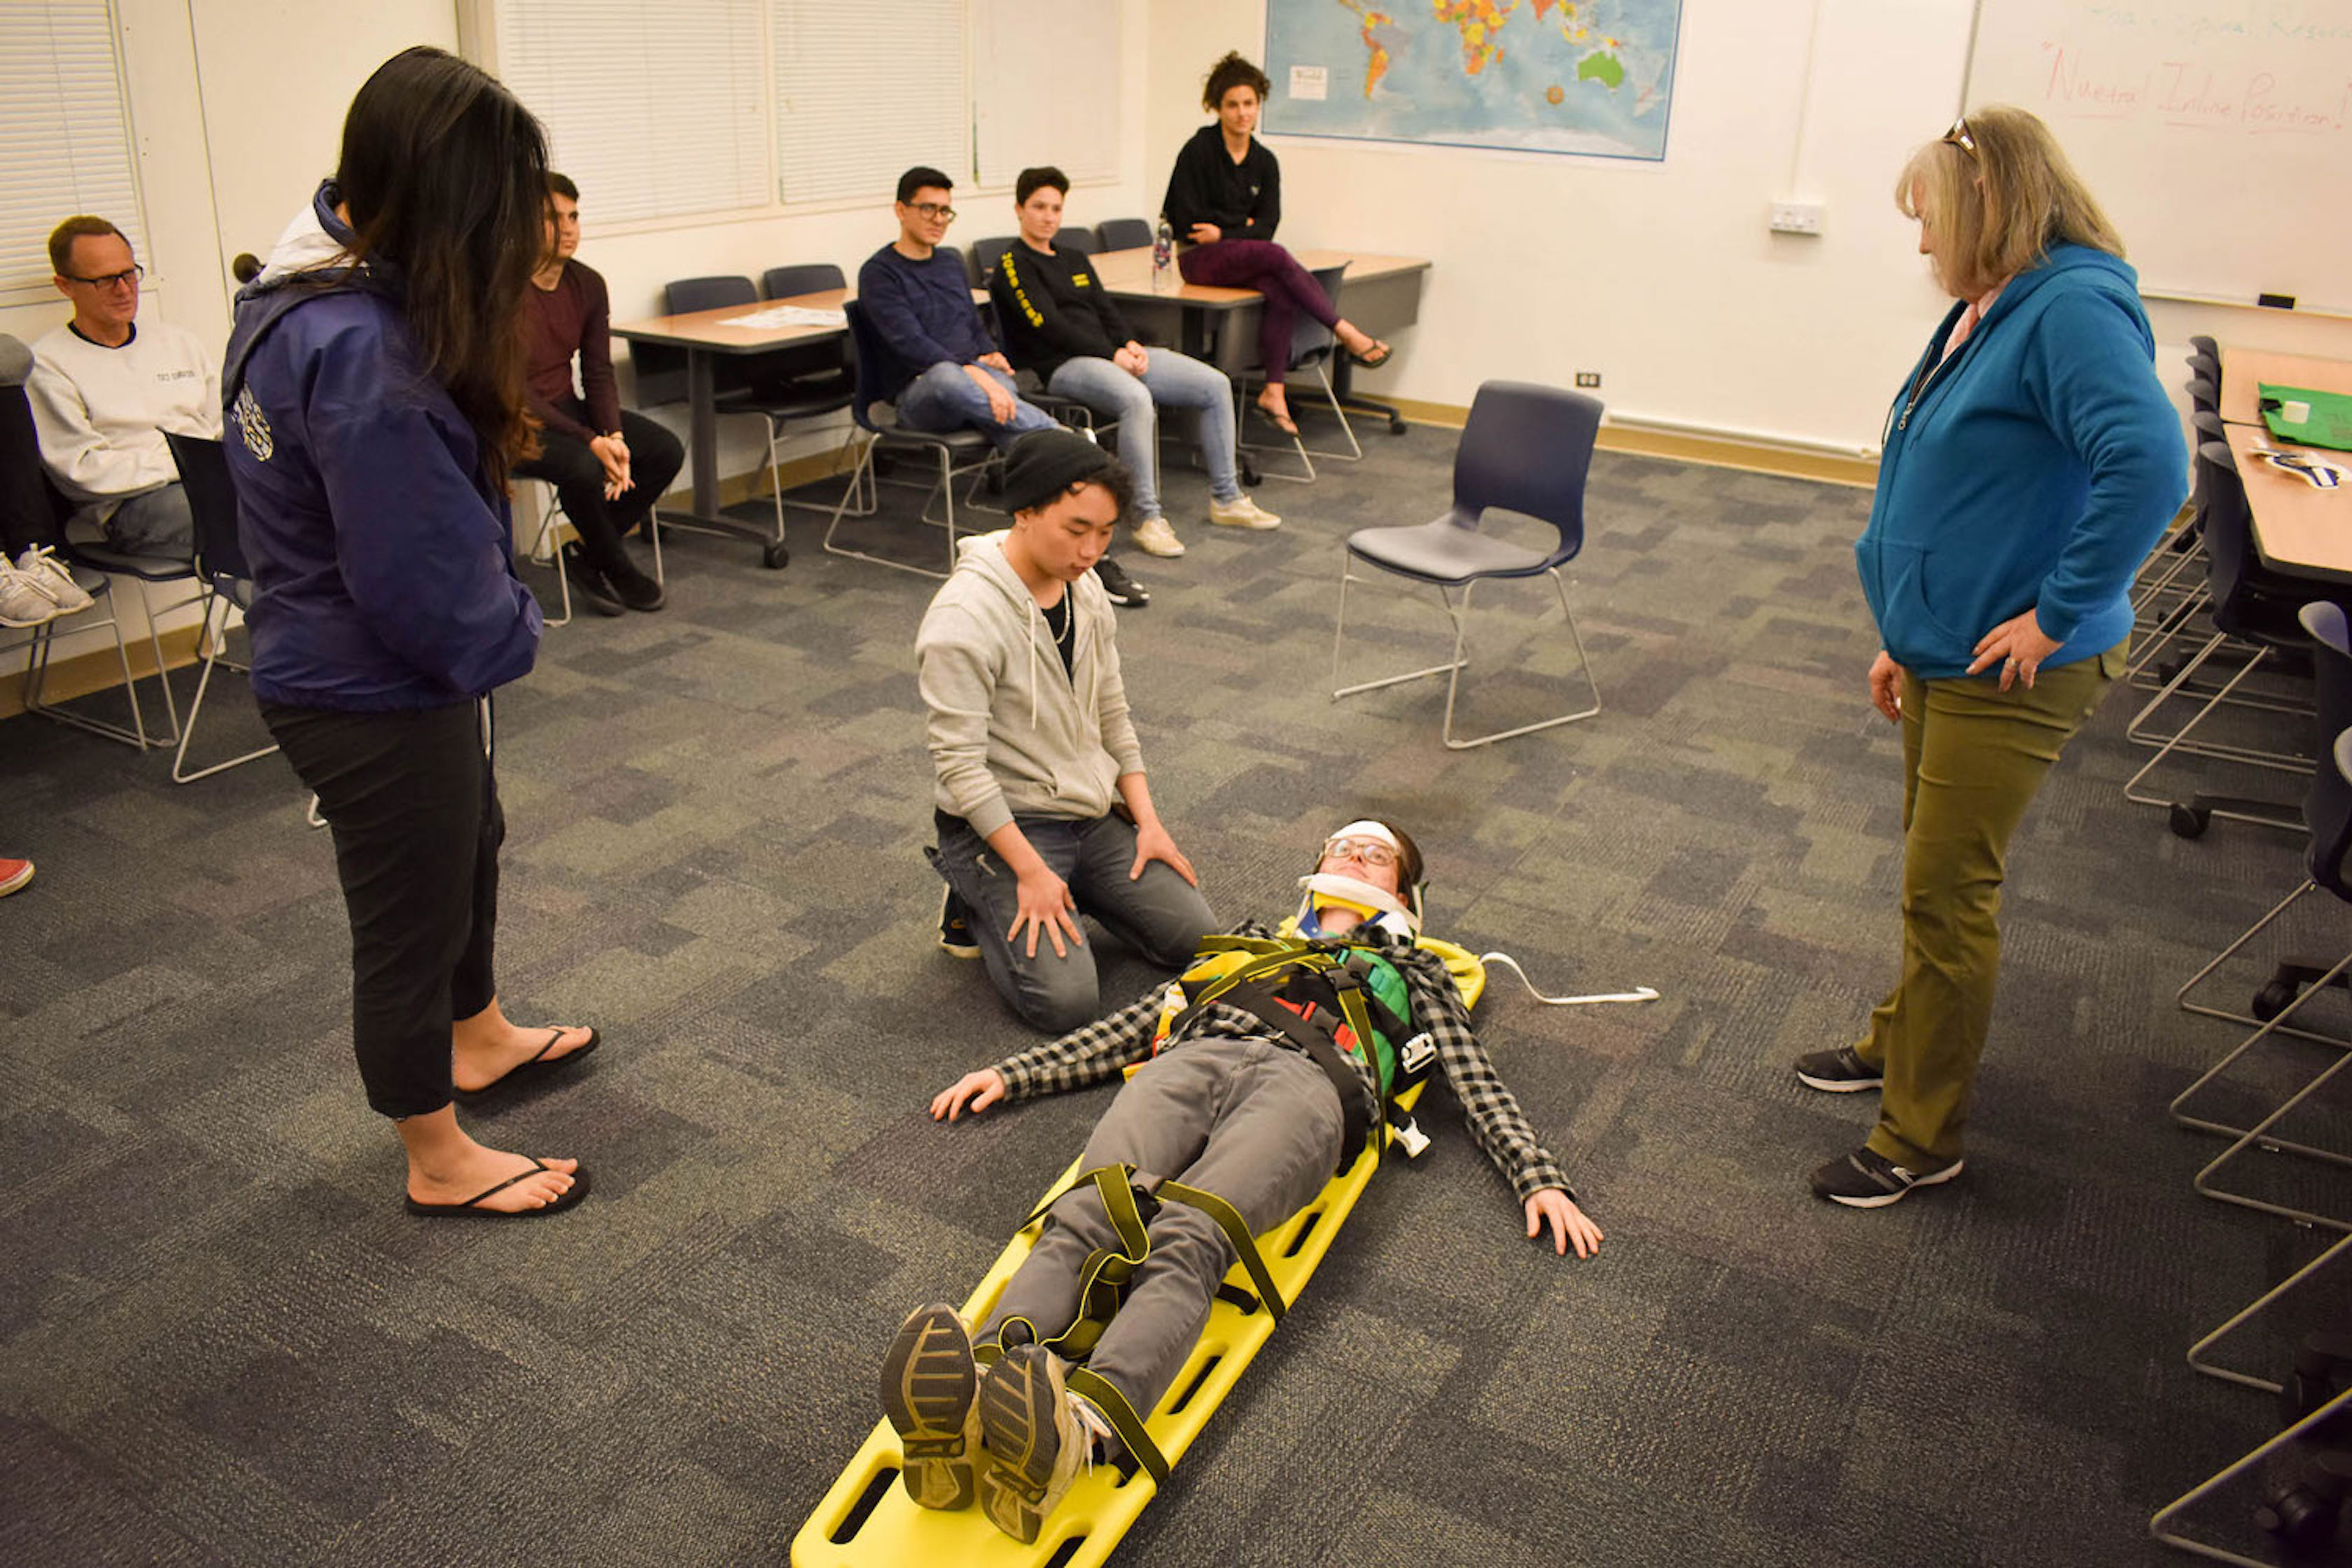 EMT Training with Mannequin